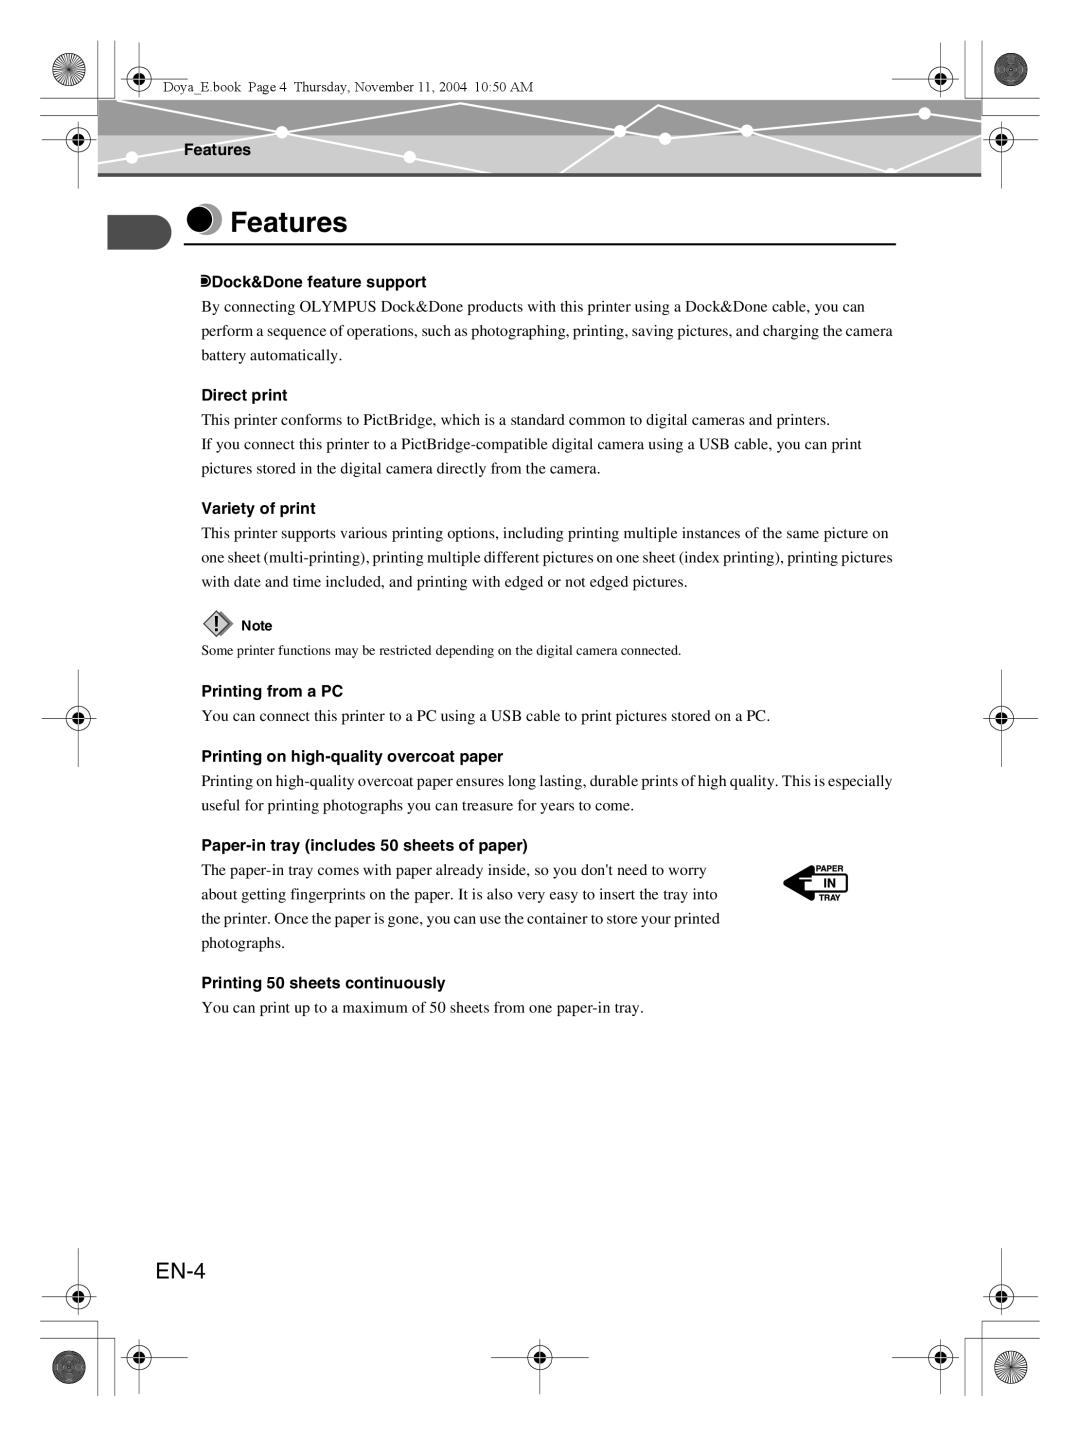 Olympus P-S100 user manual Features, EN-4, QDock&Done feature support, Direct print, Variety of print, Printing from a PC 